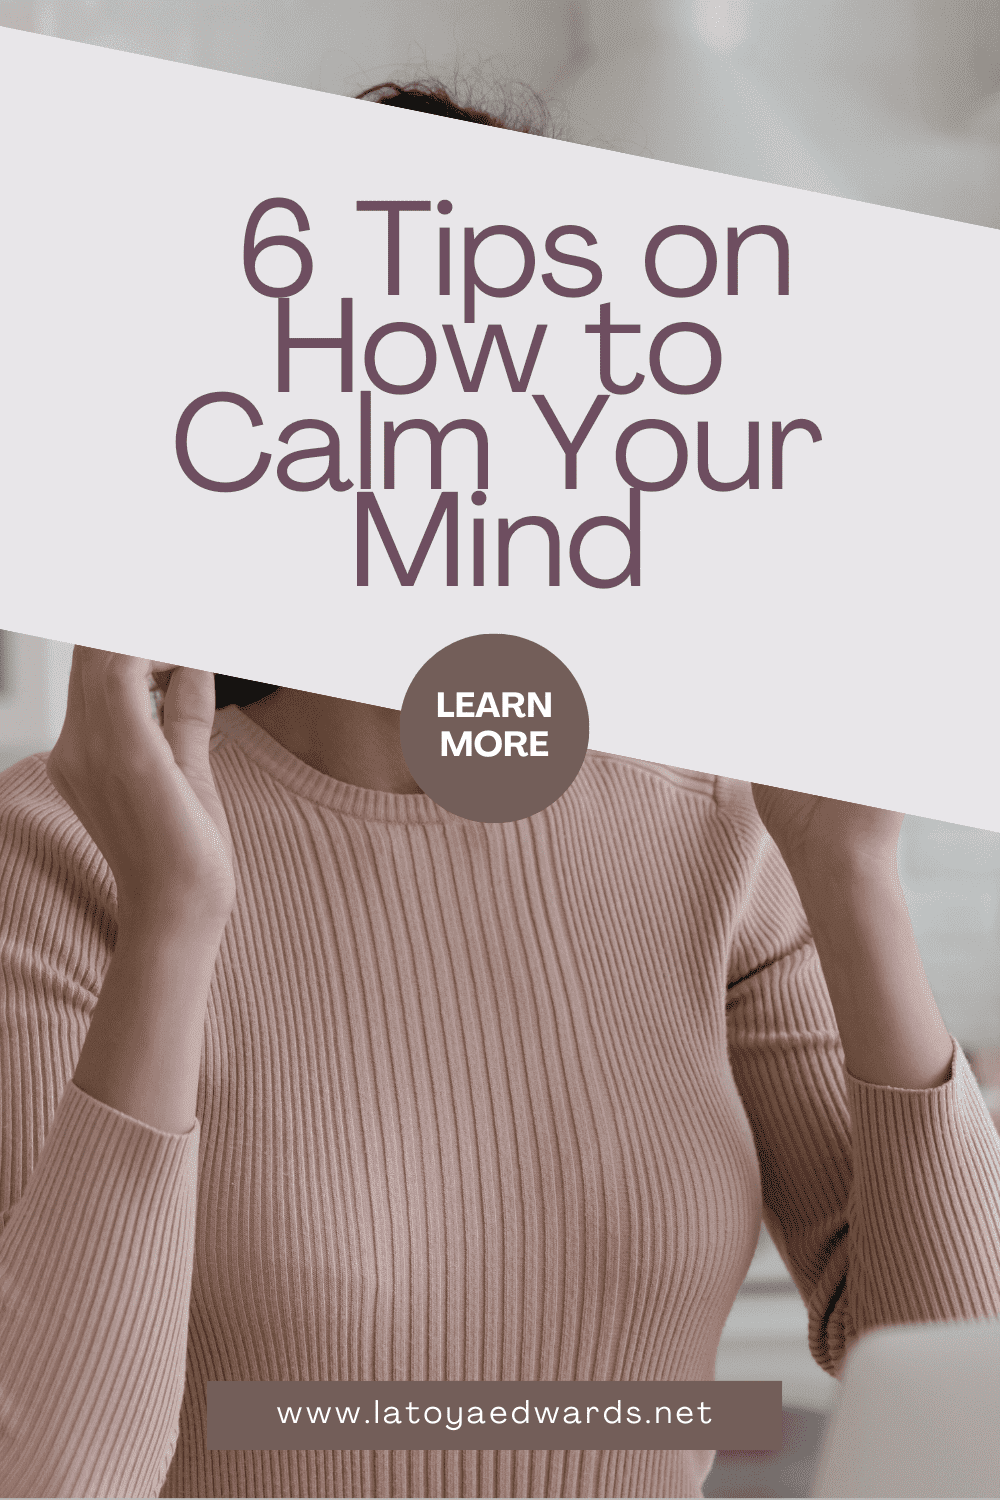 Are you looking for ways to calm your thoughts? Learn 6 practical examples of how to clear your mind of negative thoughts. Introverted thinking goes deep but that can sometimes lead down the road to overthinking and highly sensitive person burnout. If you're looking for some helpful mindfulness activities visit the full blog post to read more.